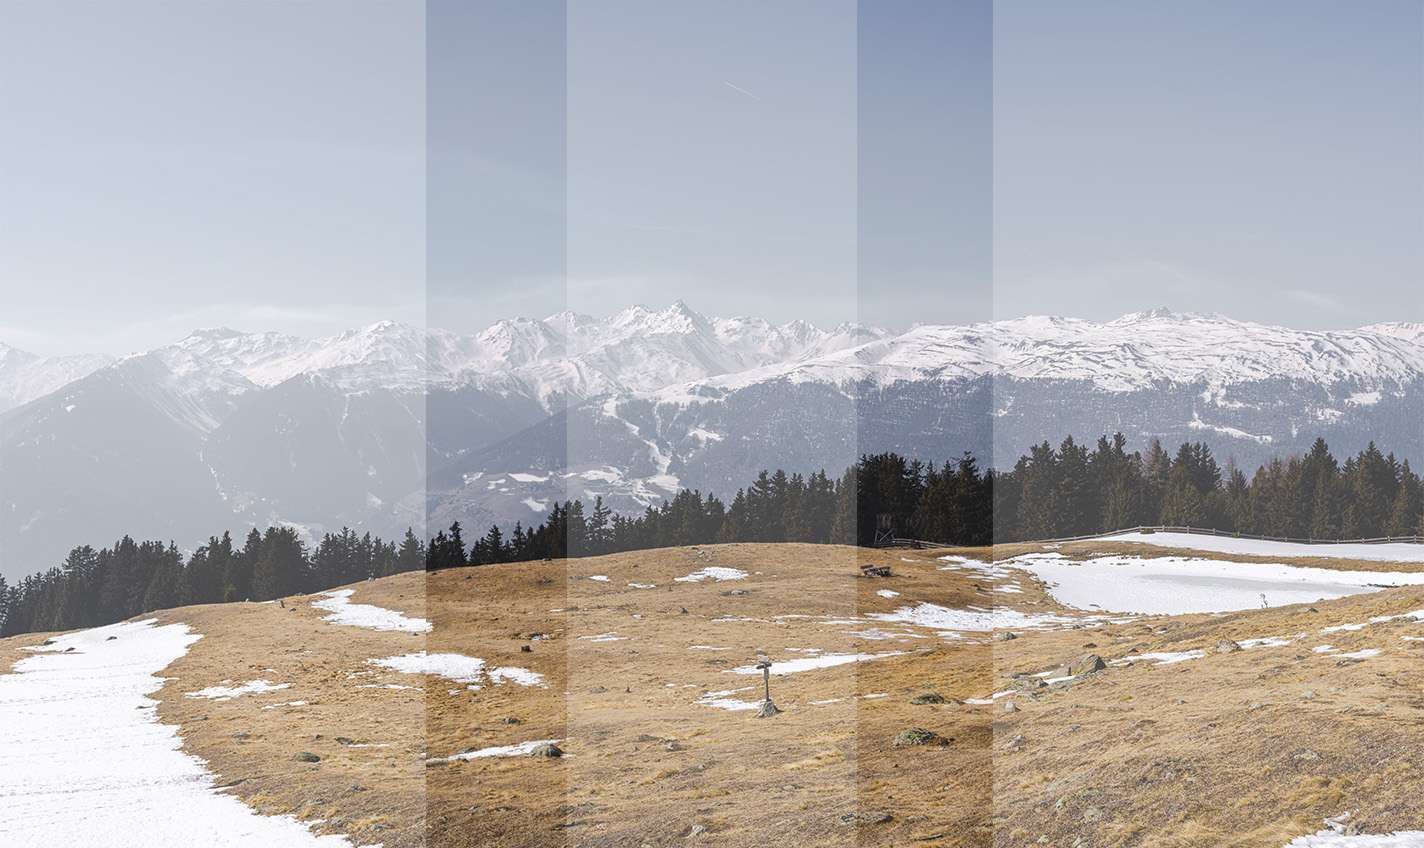 The panorama head (together with the nodal point adapter in the case of a multi-row panorama) ensures the necessary, uniform overlapping of the individual images